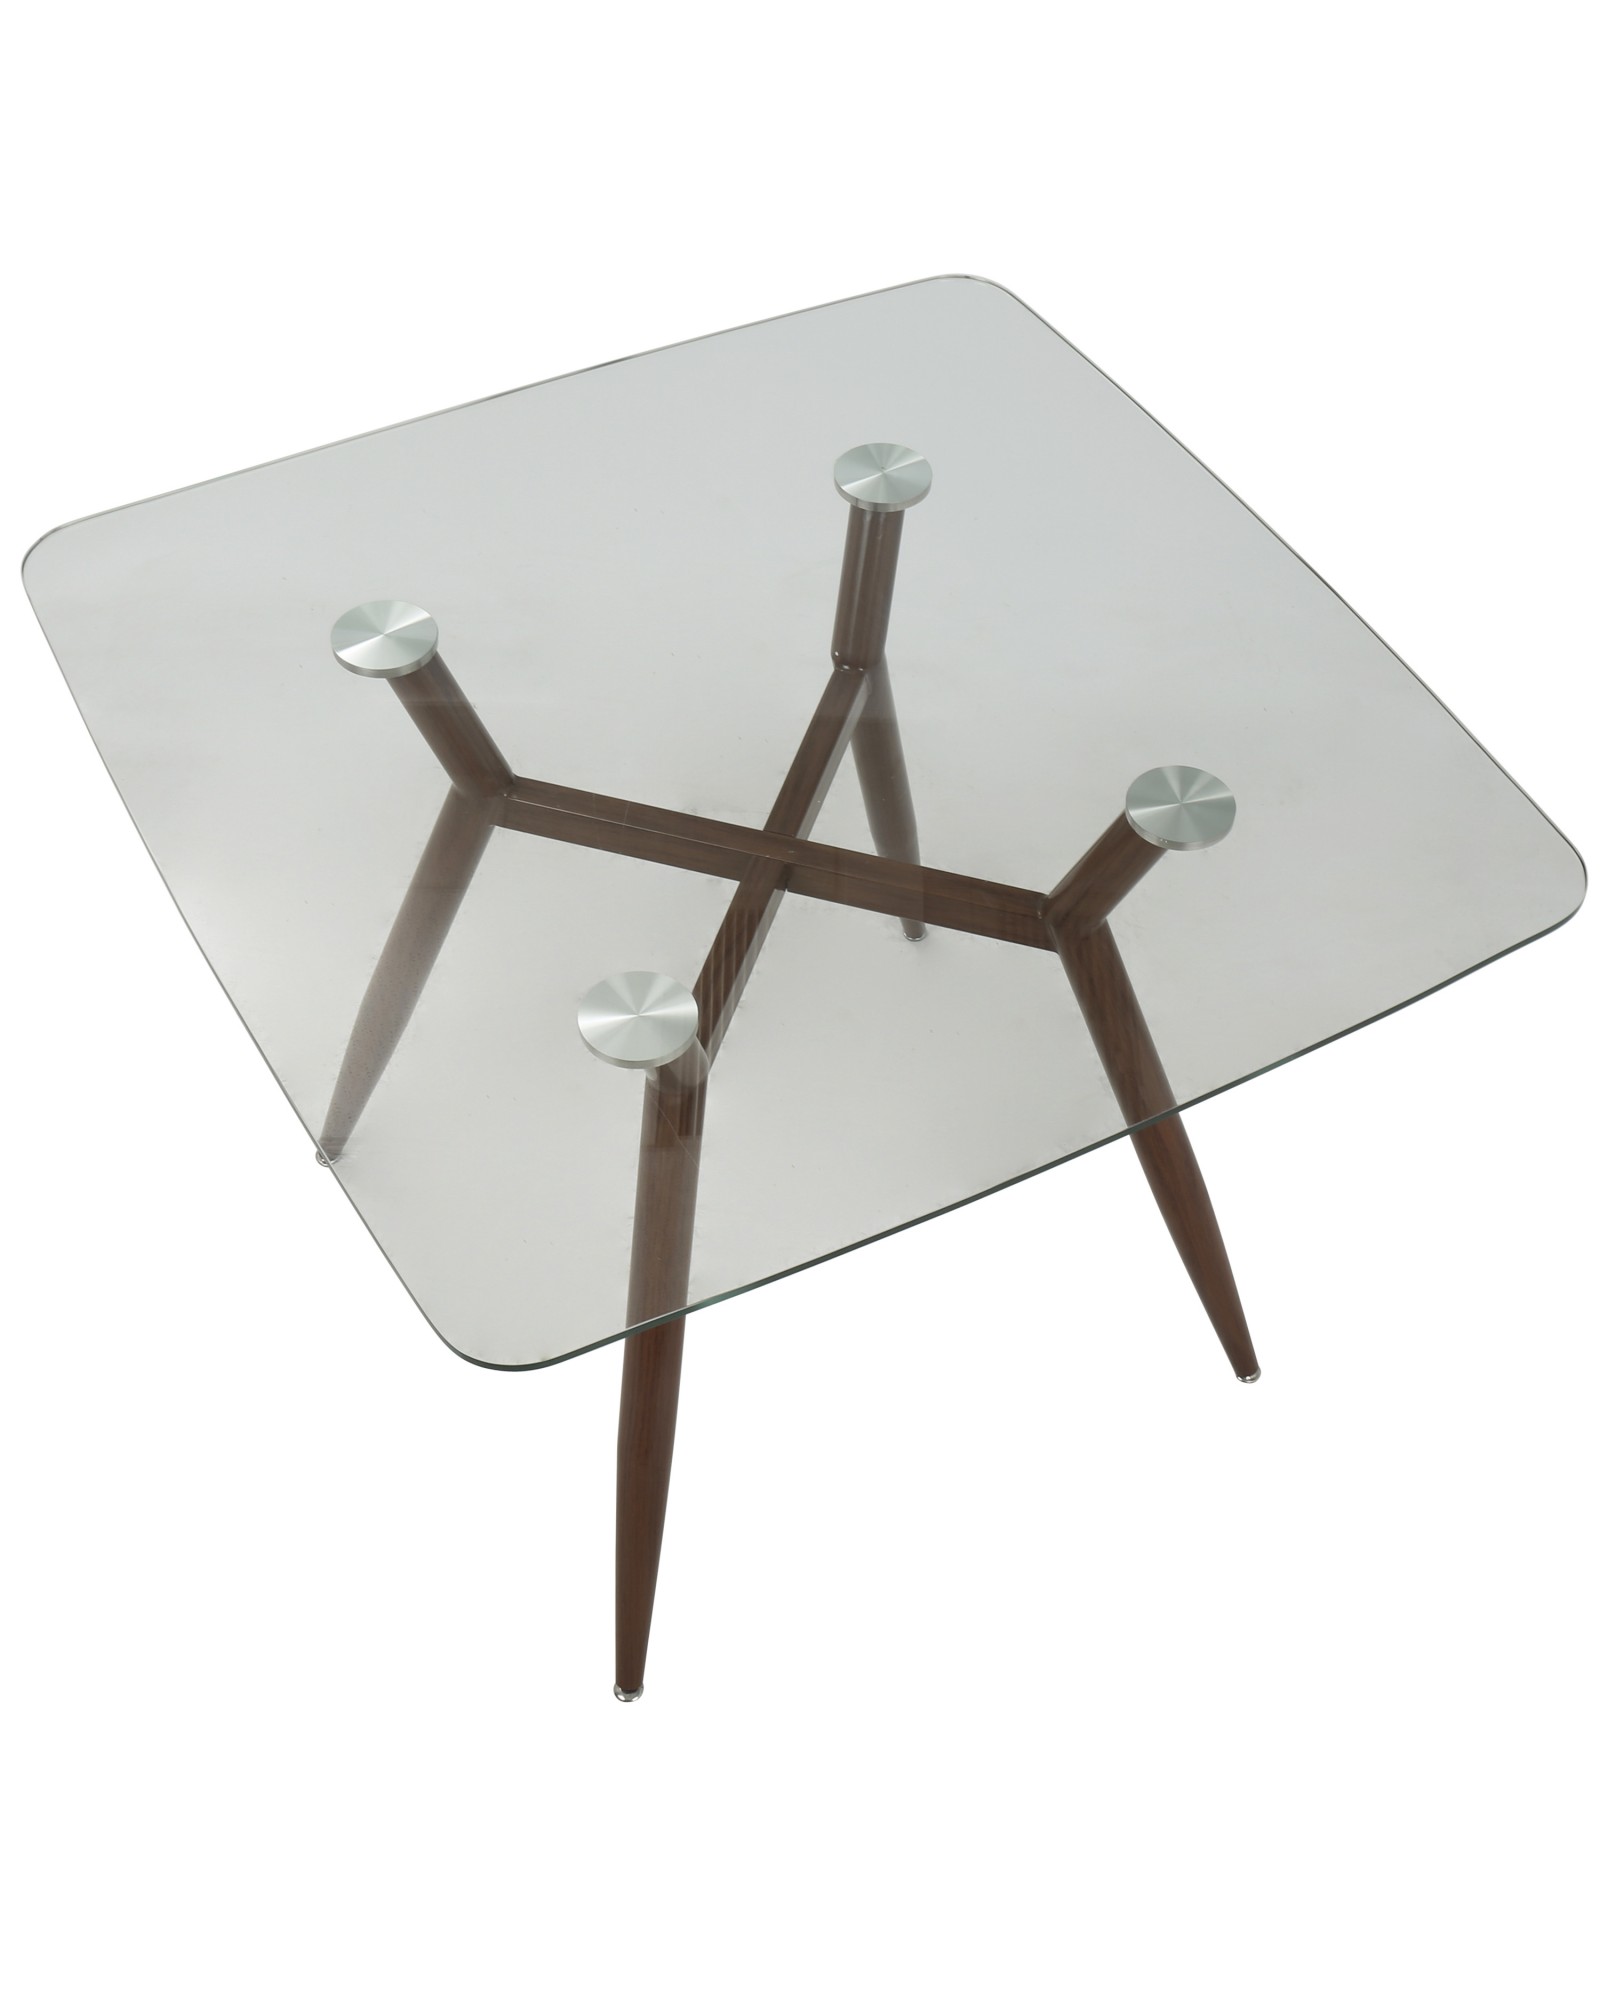 Clara Mid-Century Modern Square Dining Table with Walnut Metal Legs and Clear Glass Top